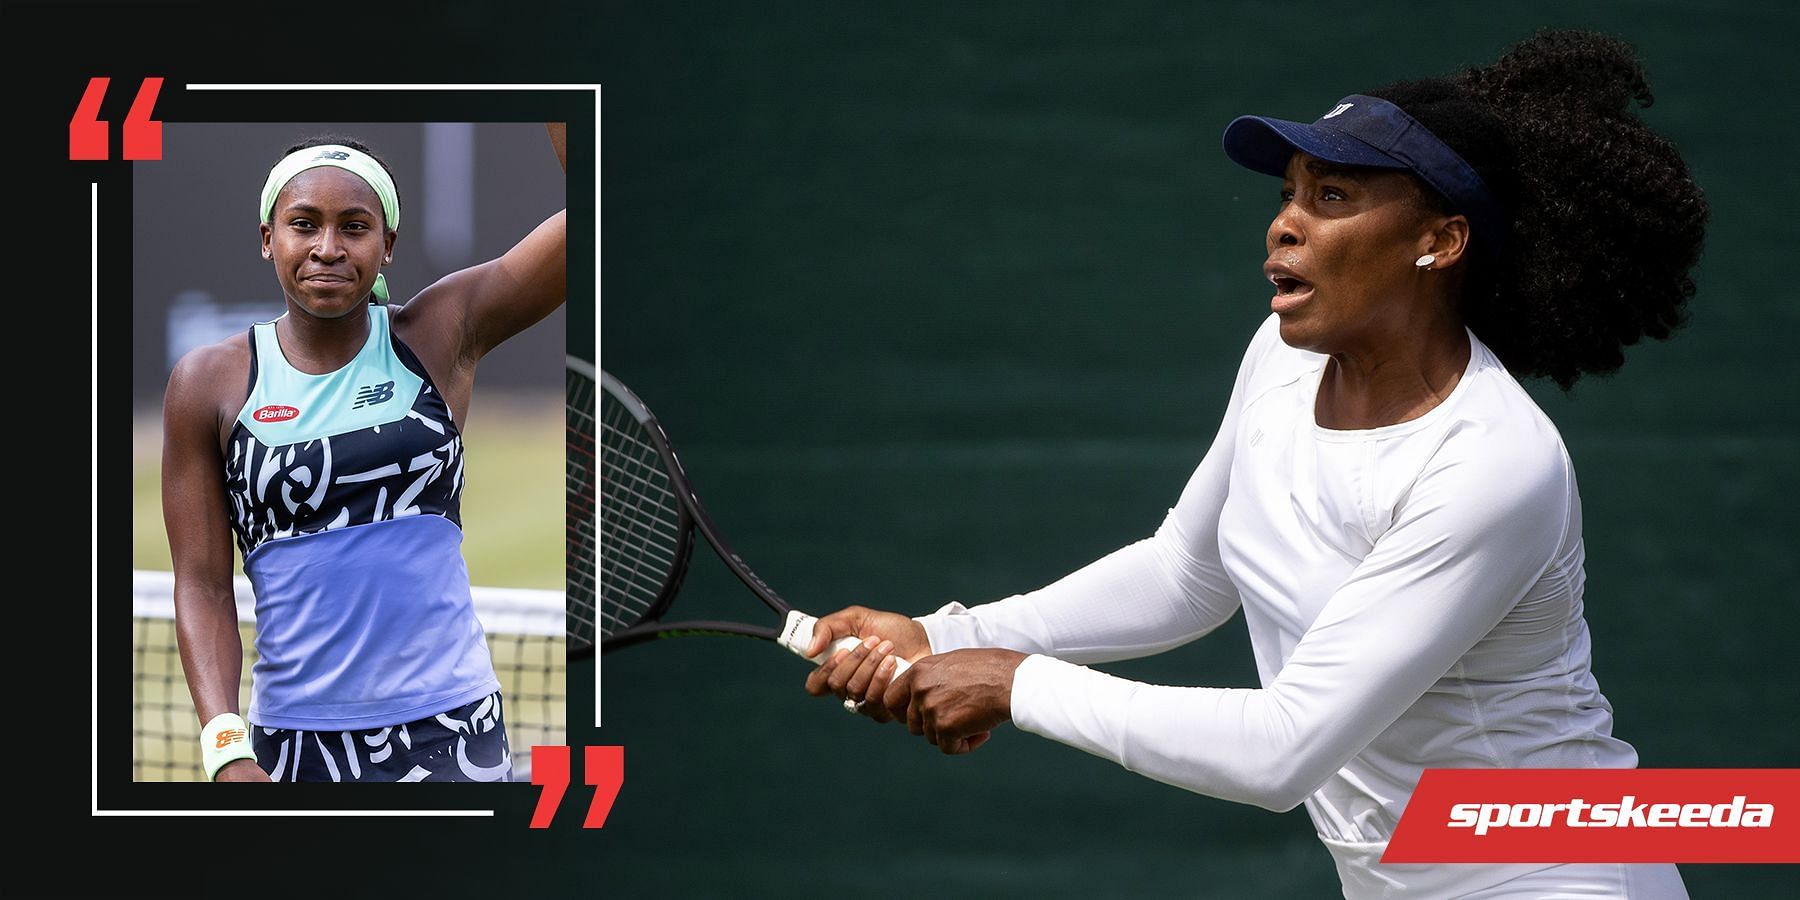 Coco Gauff marked her Grand Slam debut with a win over five-time Wimbledon winner Venus Williams.